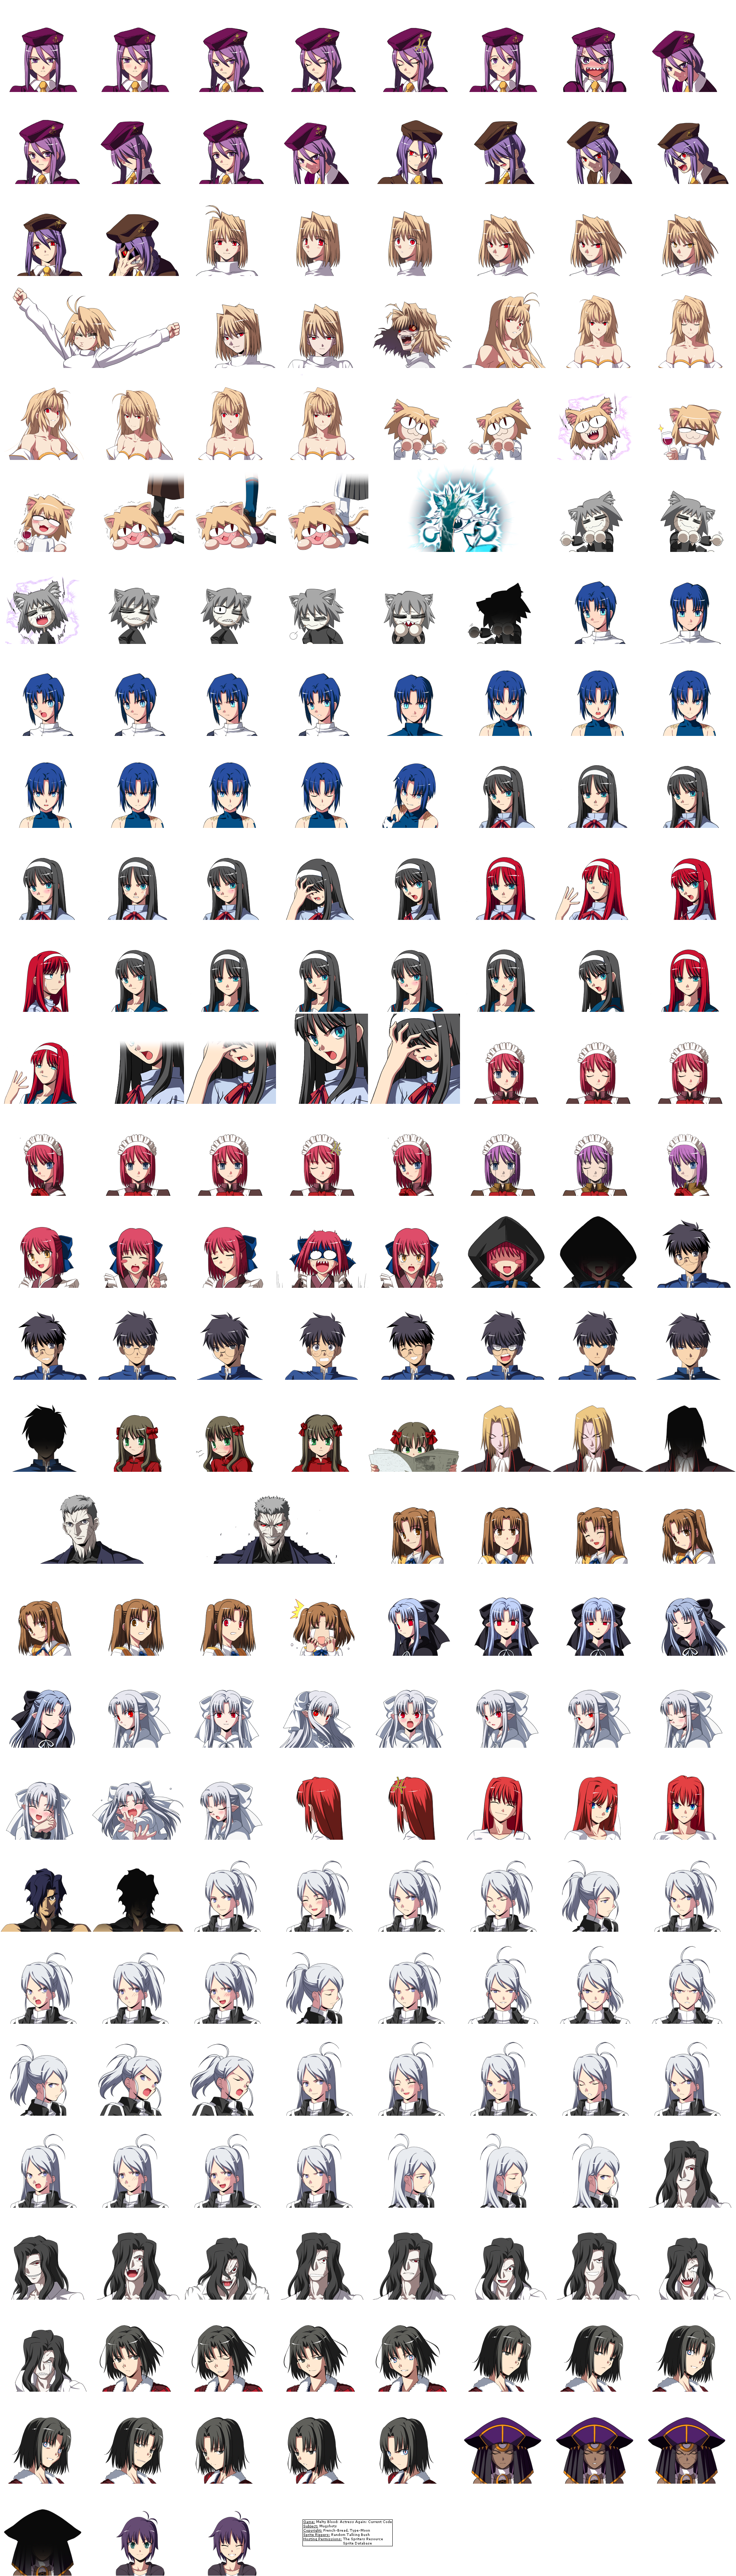 Melty Blood: Actress Again: Current Code - Mugshots